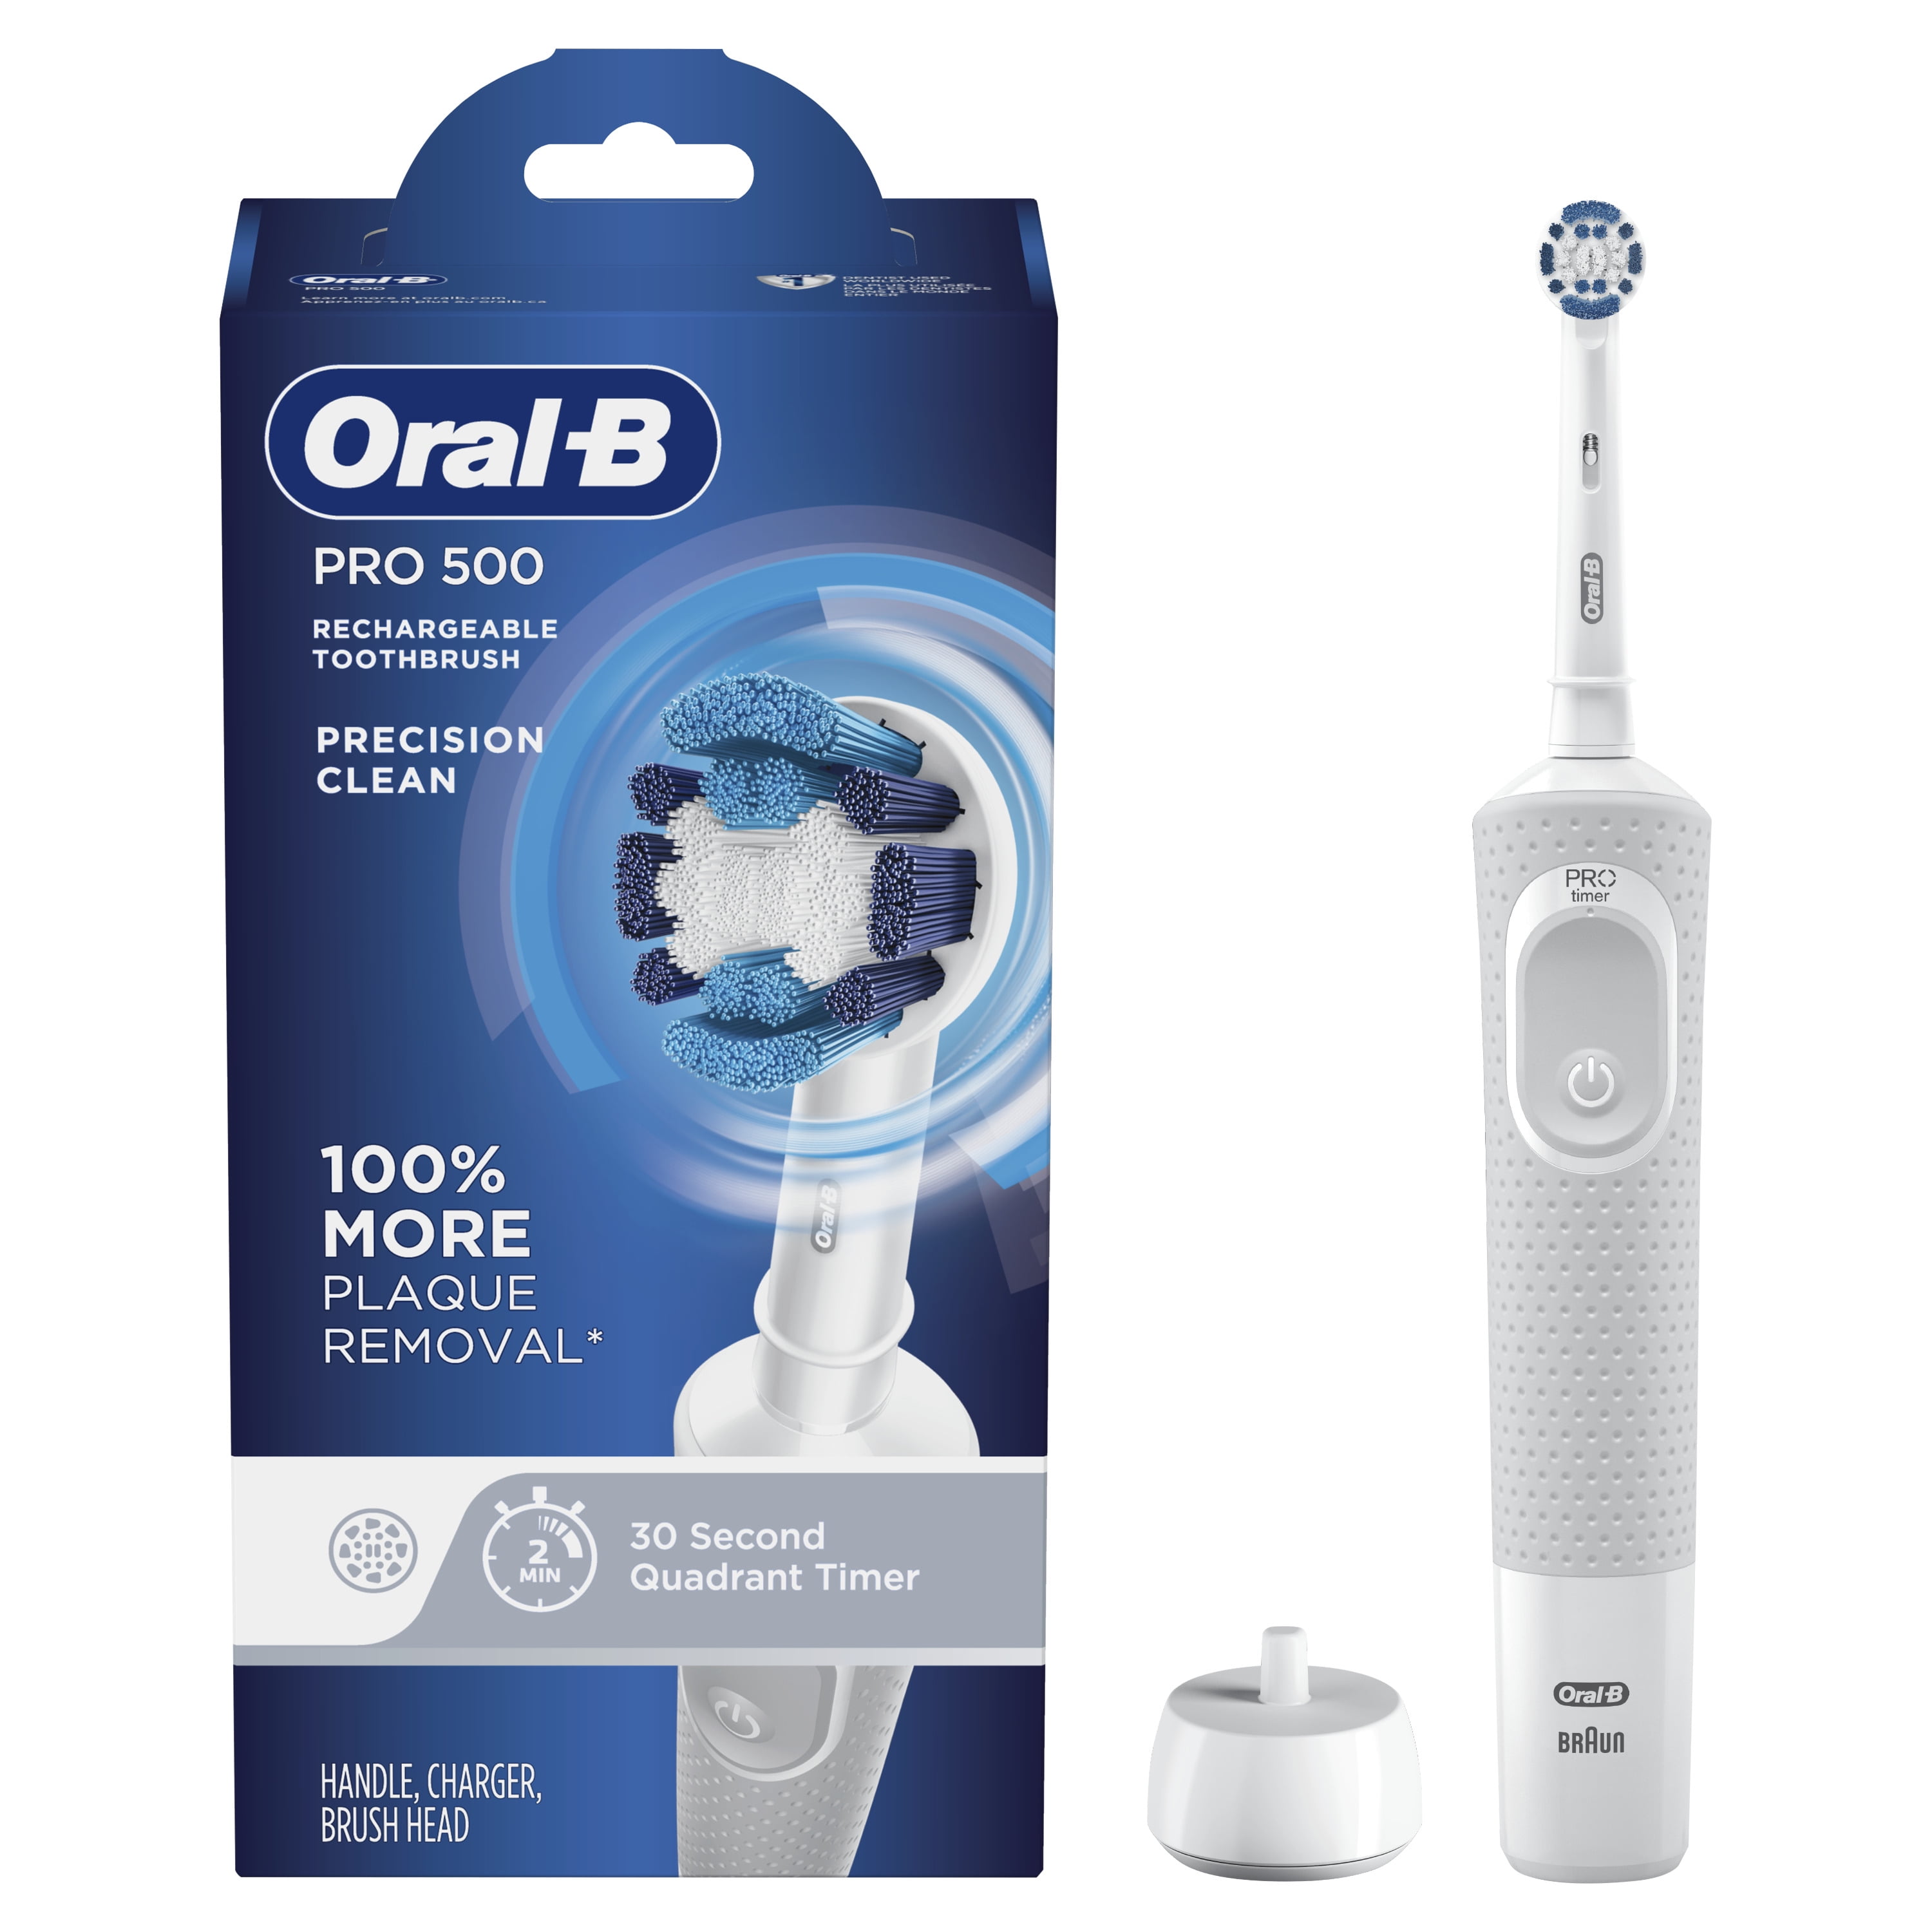 Stuiteren Sneeuwwitje directory Oral-B Pro 500 Precision Clean Electric Rechargeable Toothbrush, 1 Ct,  White - Walmart.com